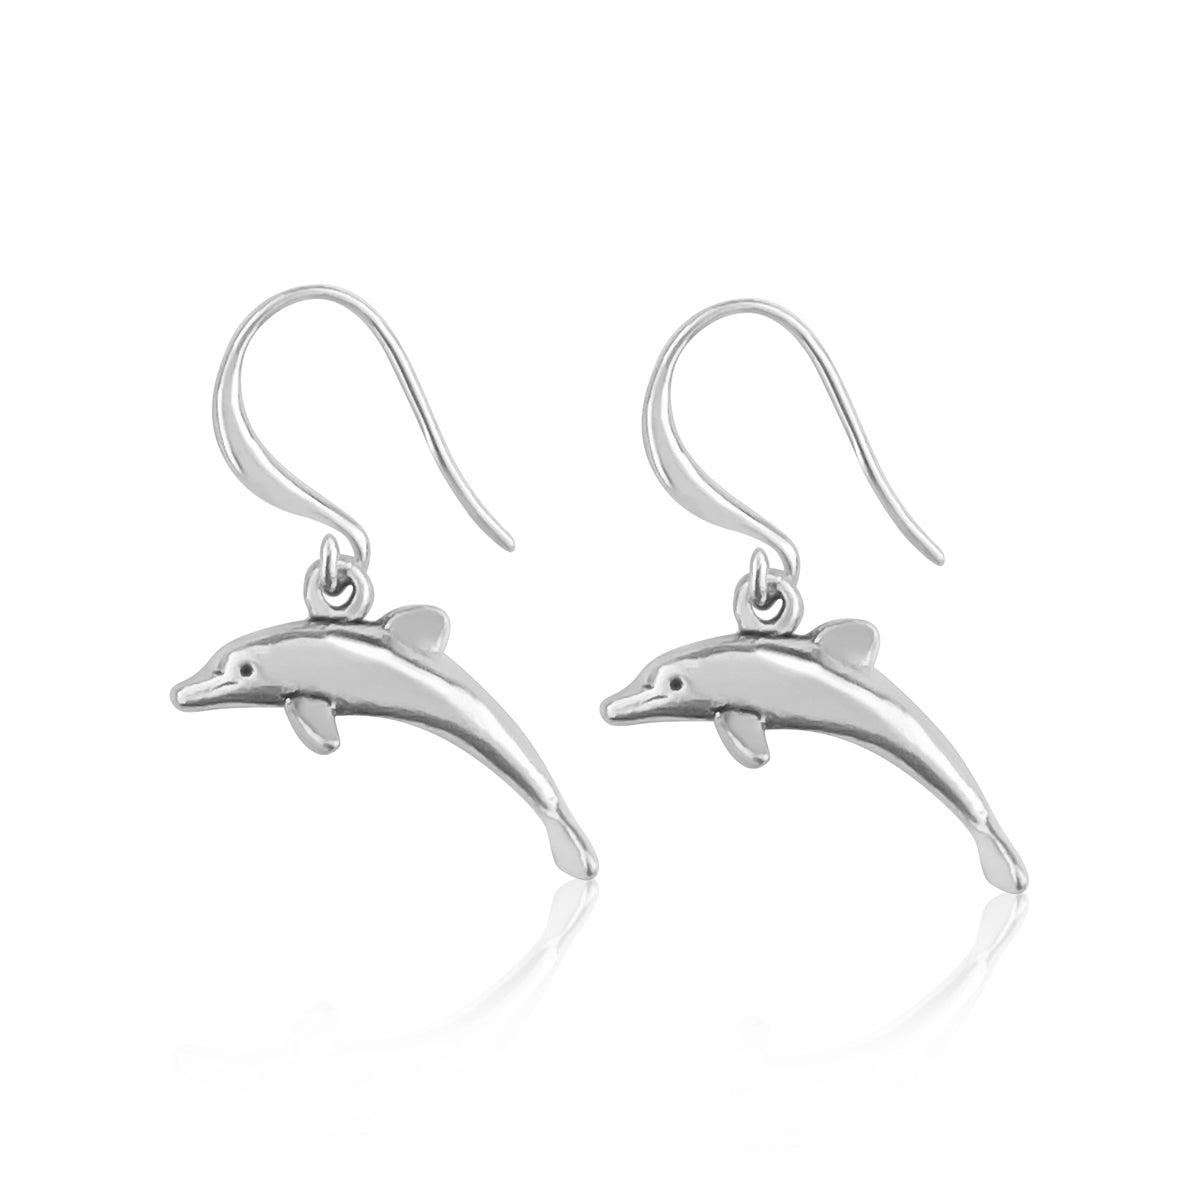 These Dolphin Spirit Earrings are the perfect accessory to express your love for the sea and your playful spirit. Let them inspire you to embrace the beauty and magic of the ocean wherever you go.